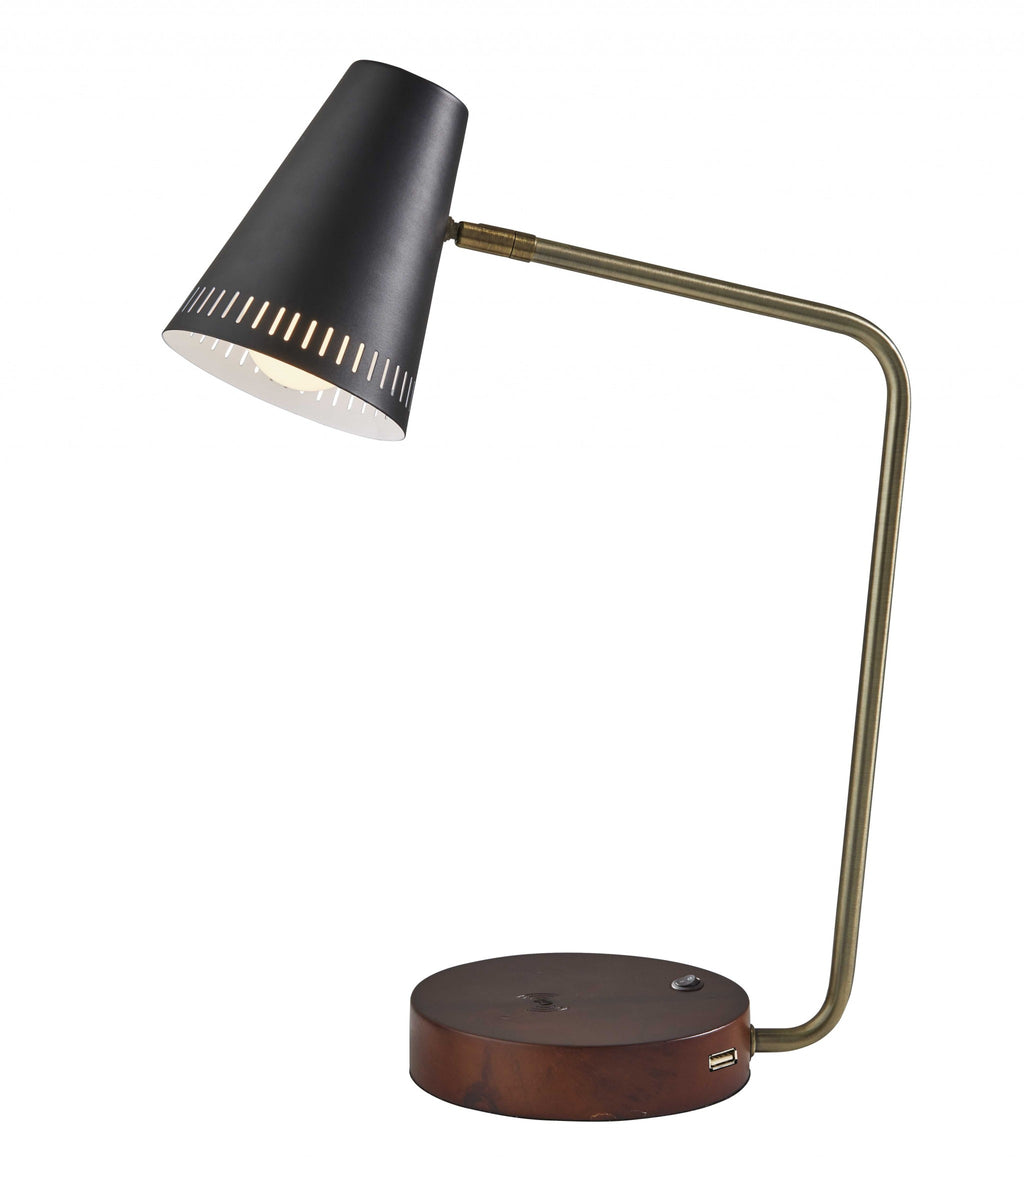 Antique Brass Enhanced Tech Desk Lamp with Black Metal Vented Cone Shades - 99fab 